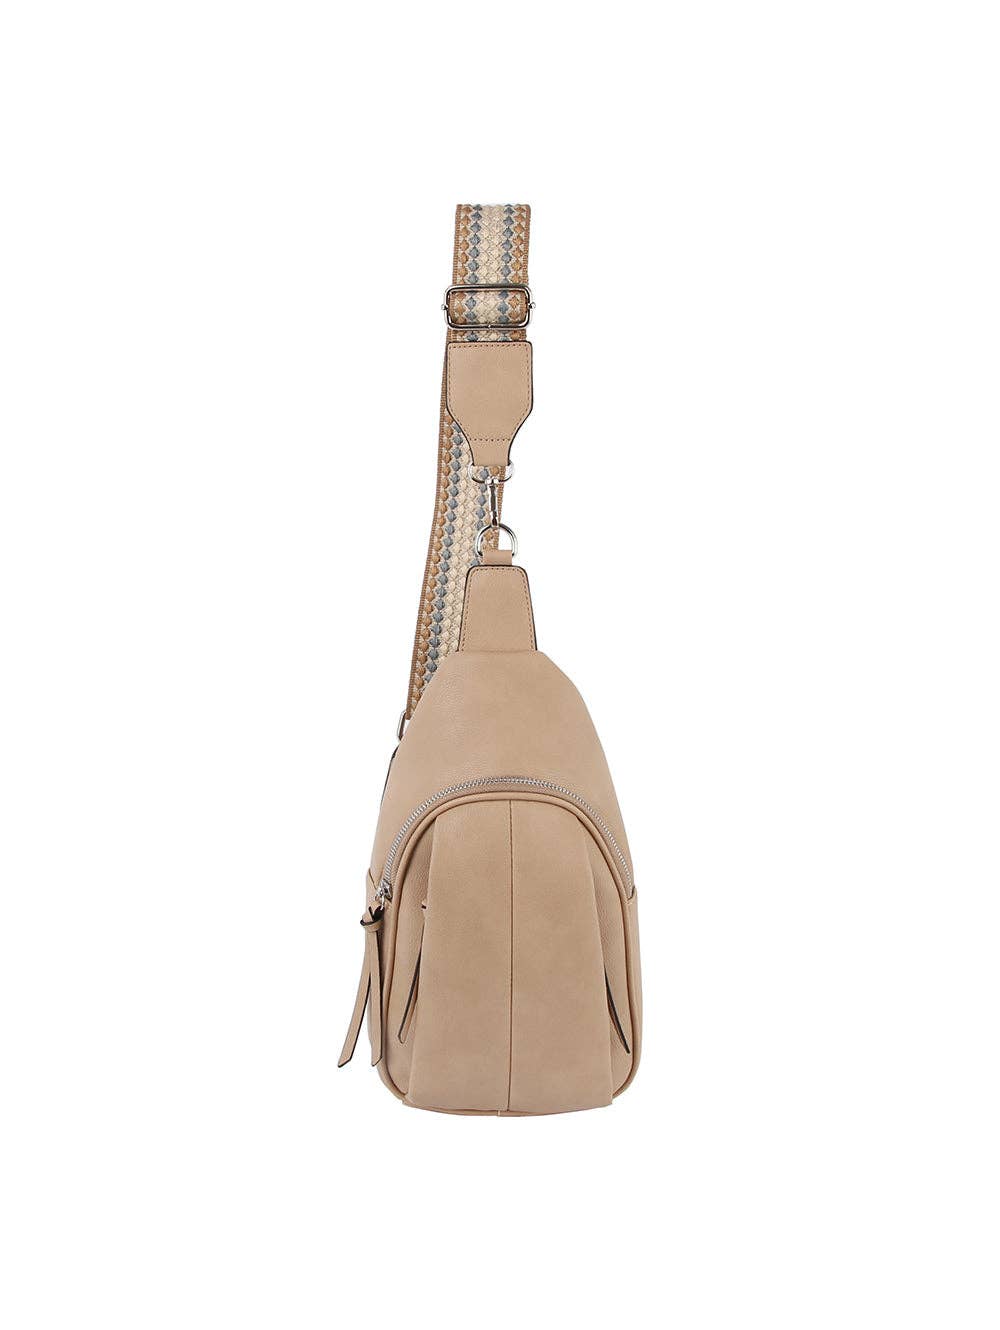 Soft leather sling bag with guitar strap - The Floratory